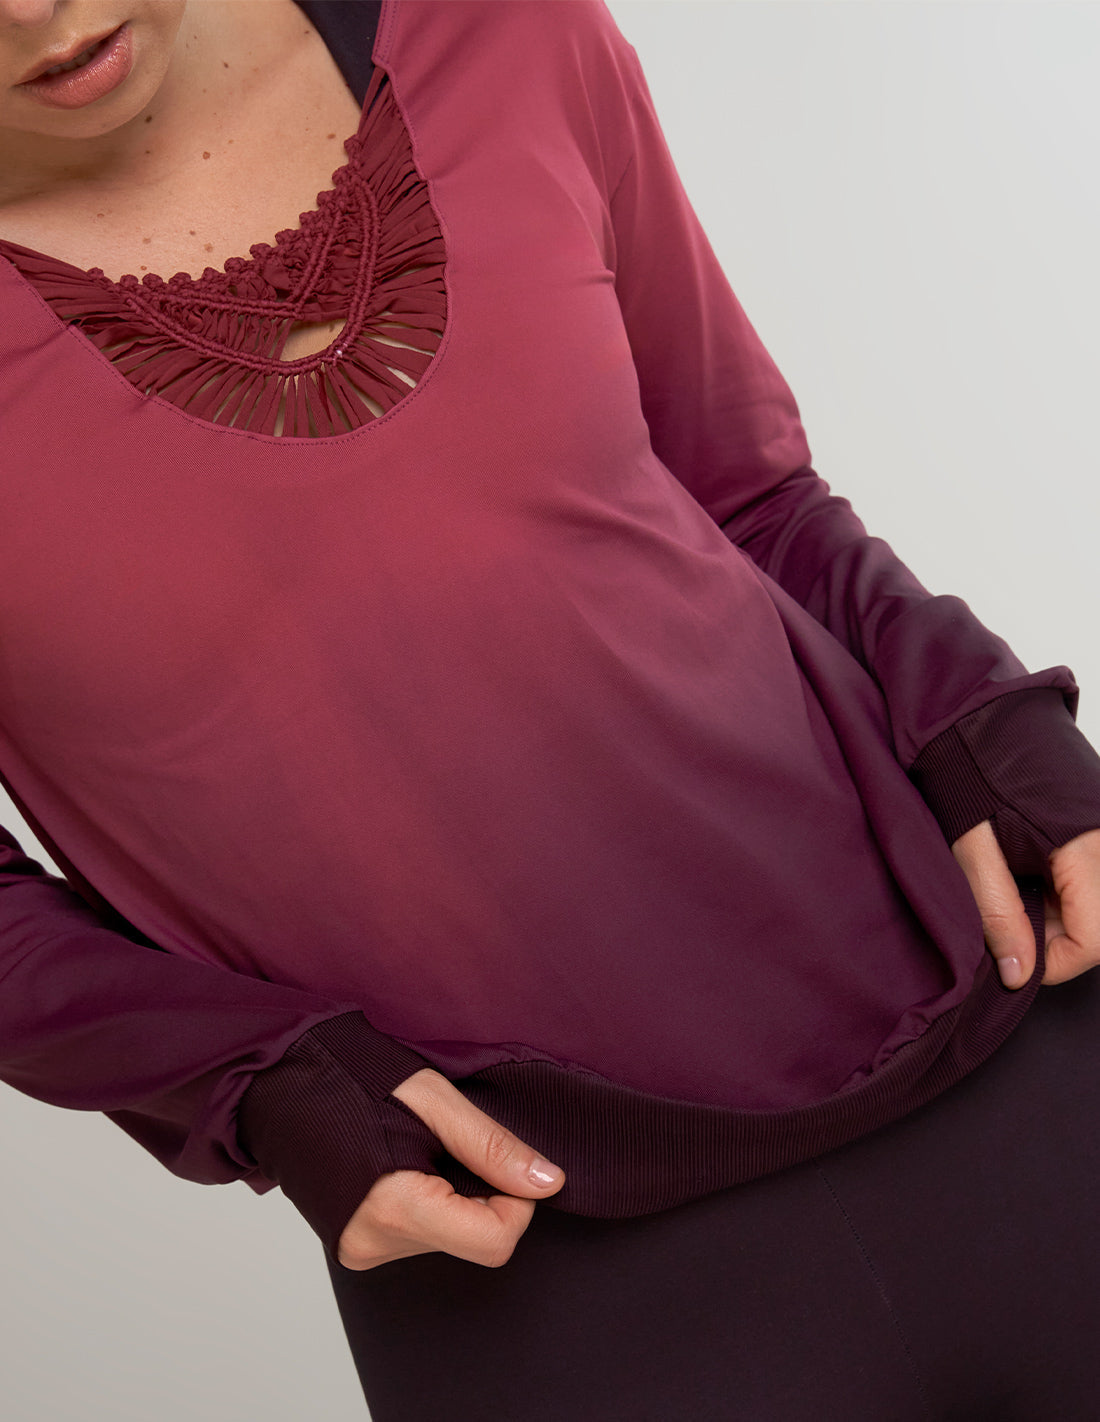 Senses Blouse Faded Purple. Hand-Dyed Blouse With Hand Woven Macramé In Faded Purple. Entreaguas